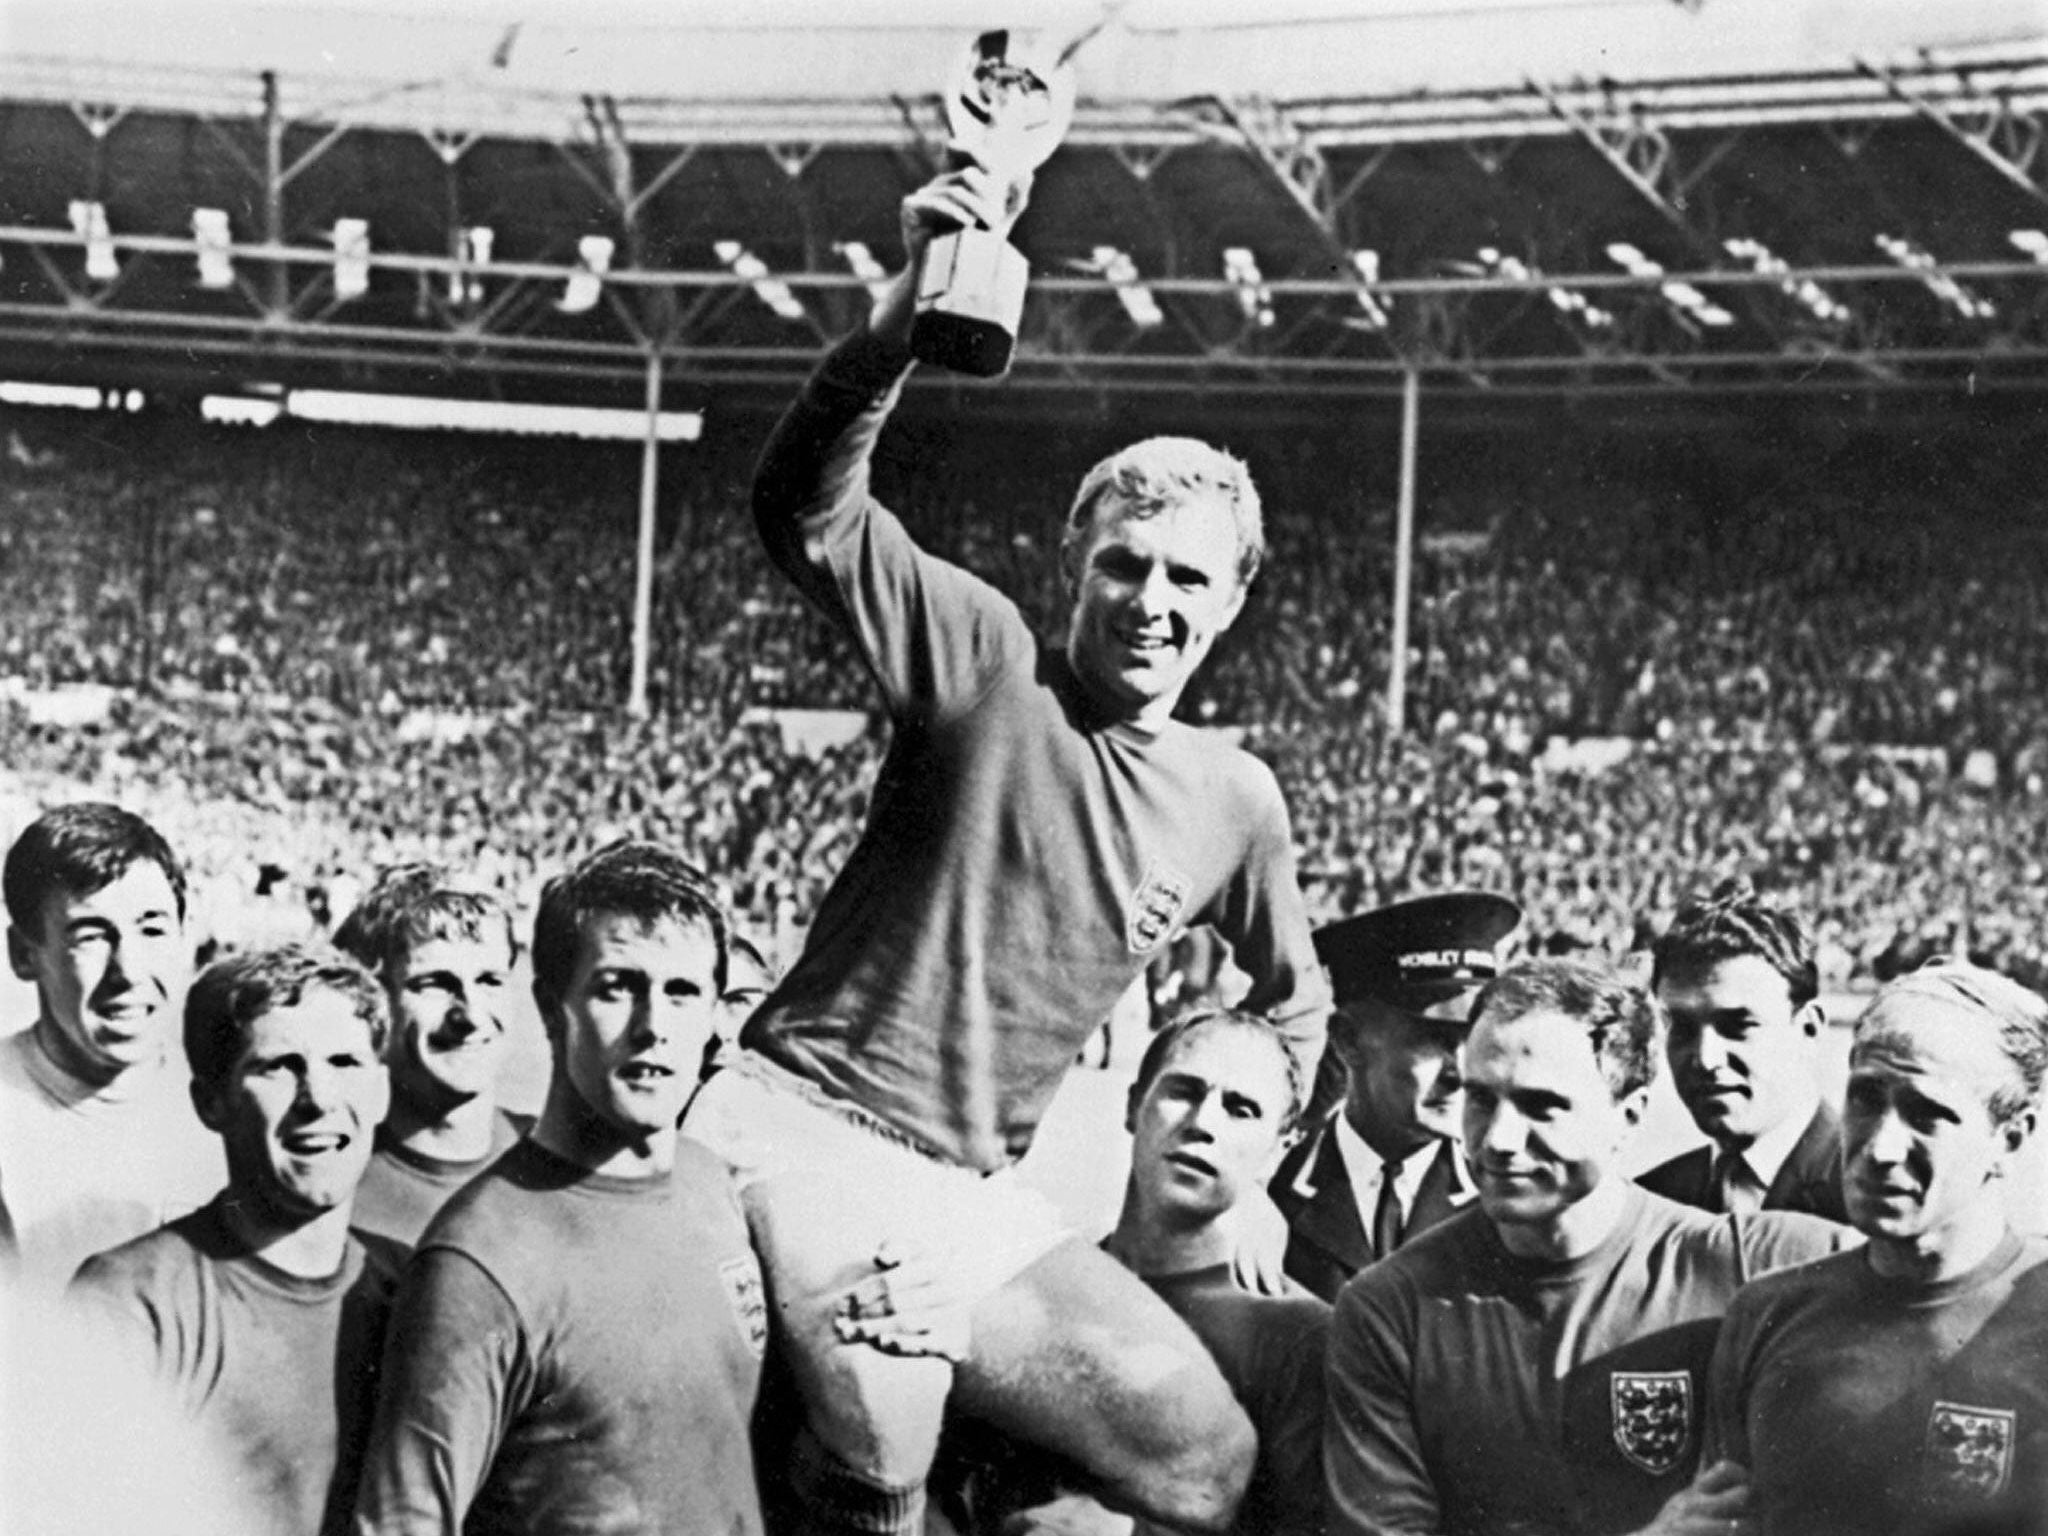 File picture of England's national soccer team captain Bobby Moore holding aloft the Jules Rimet trophy as he is carried by his teammates